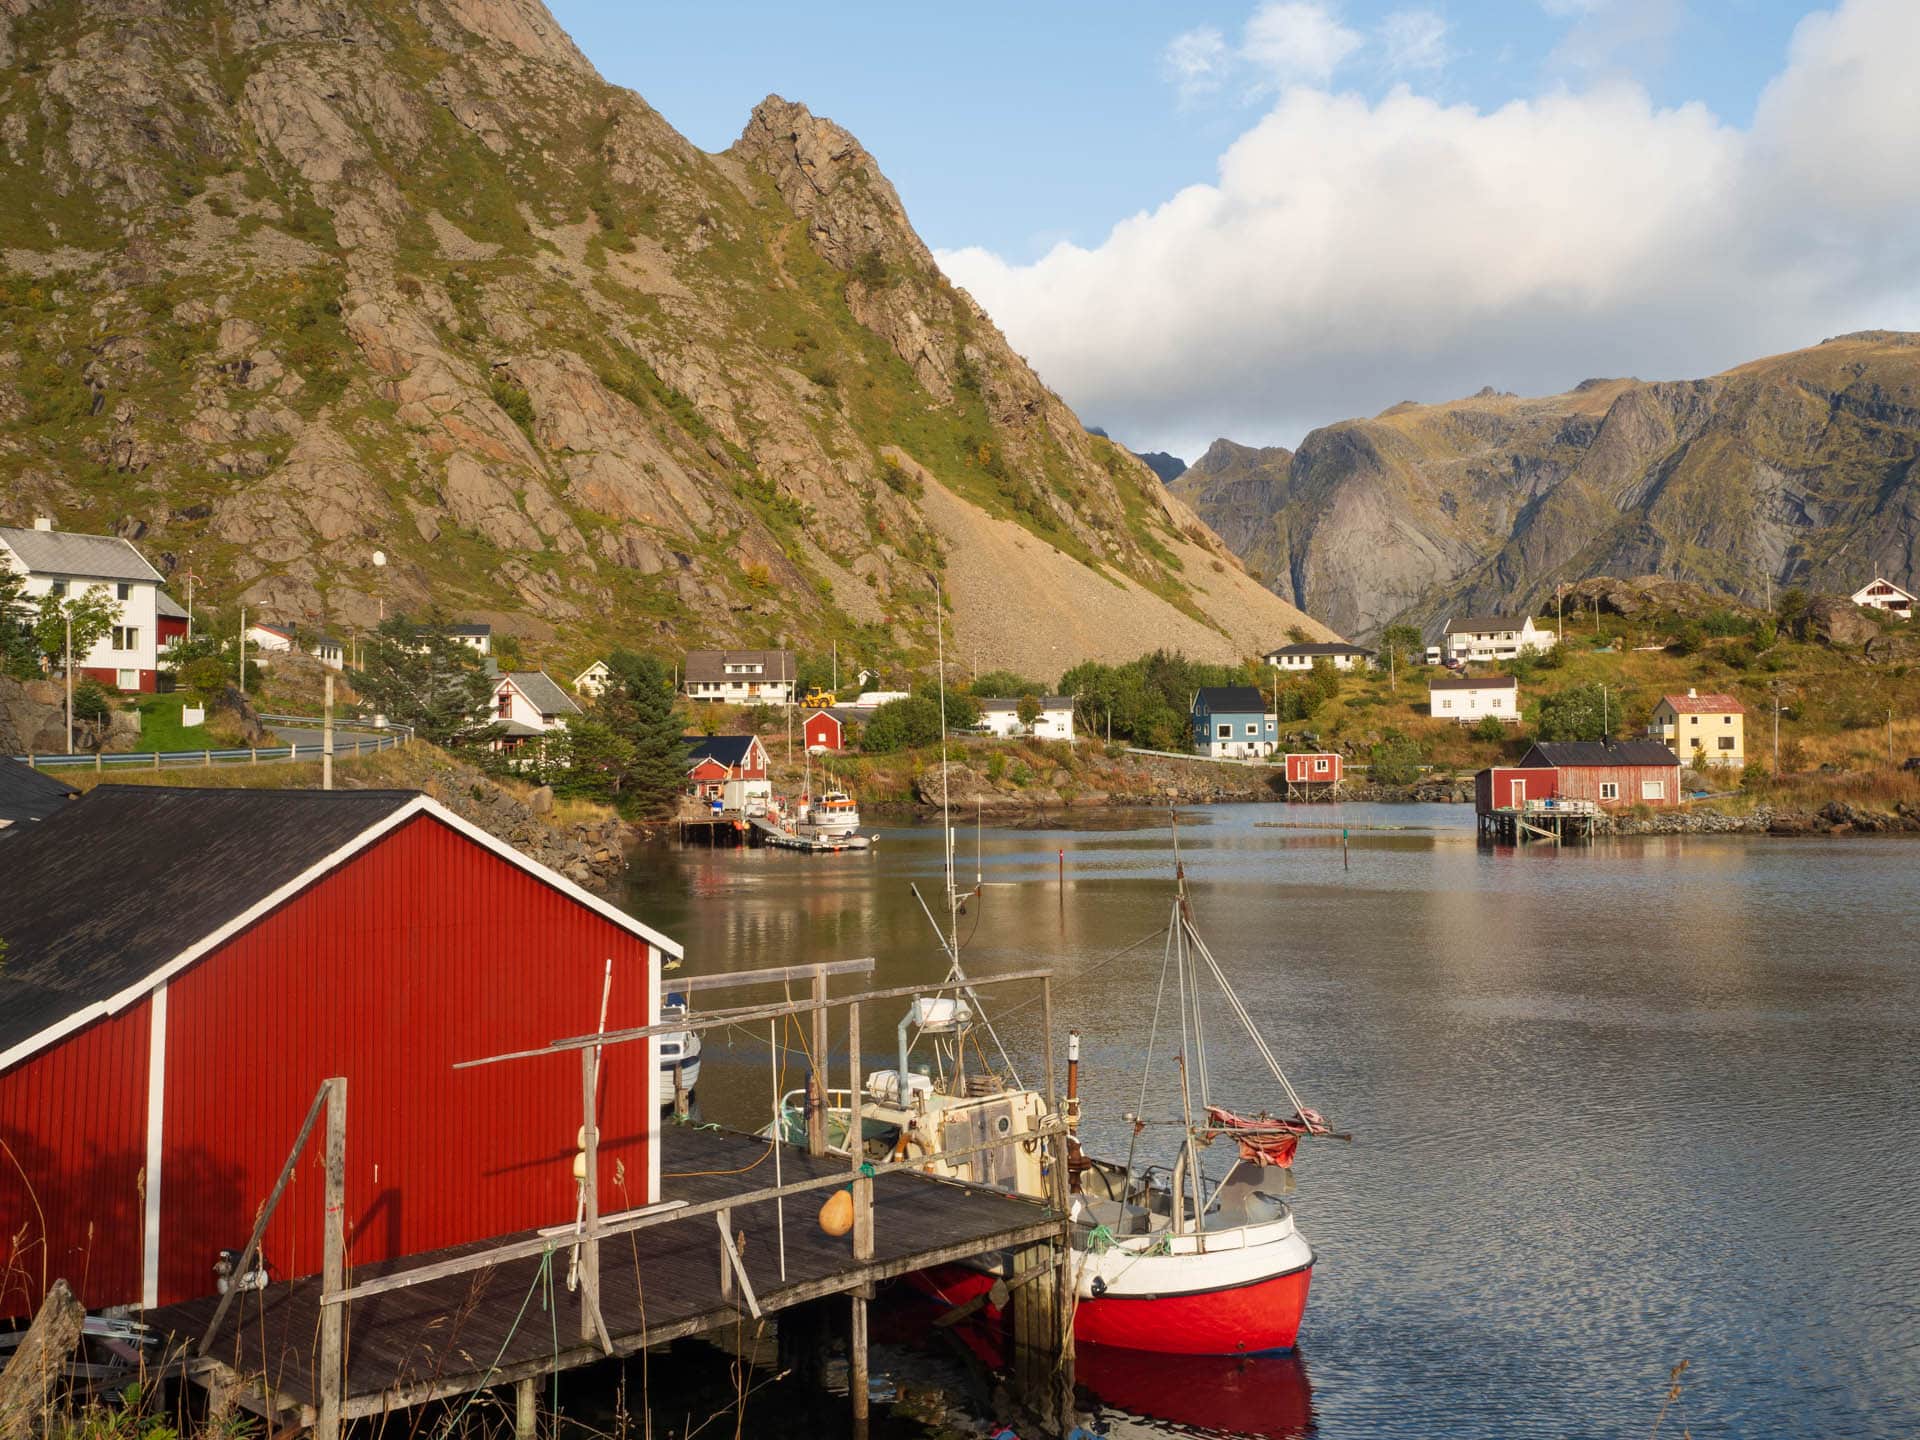 The tiny village of Sund, home to a great blacksmith